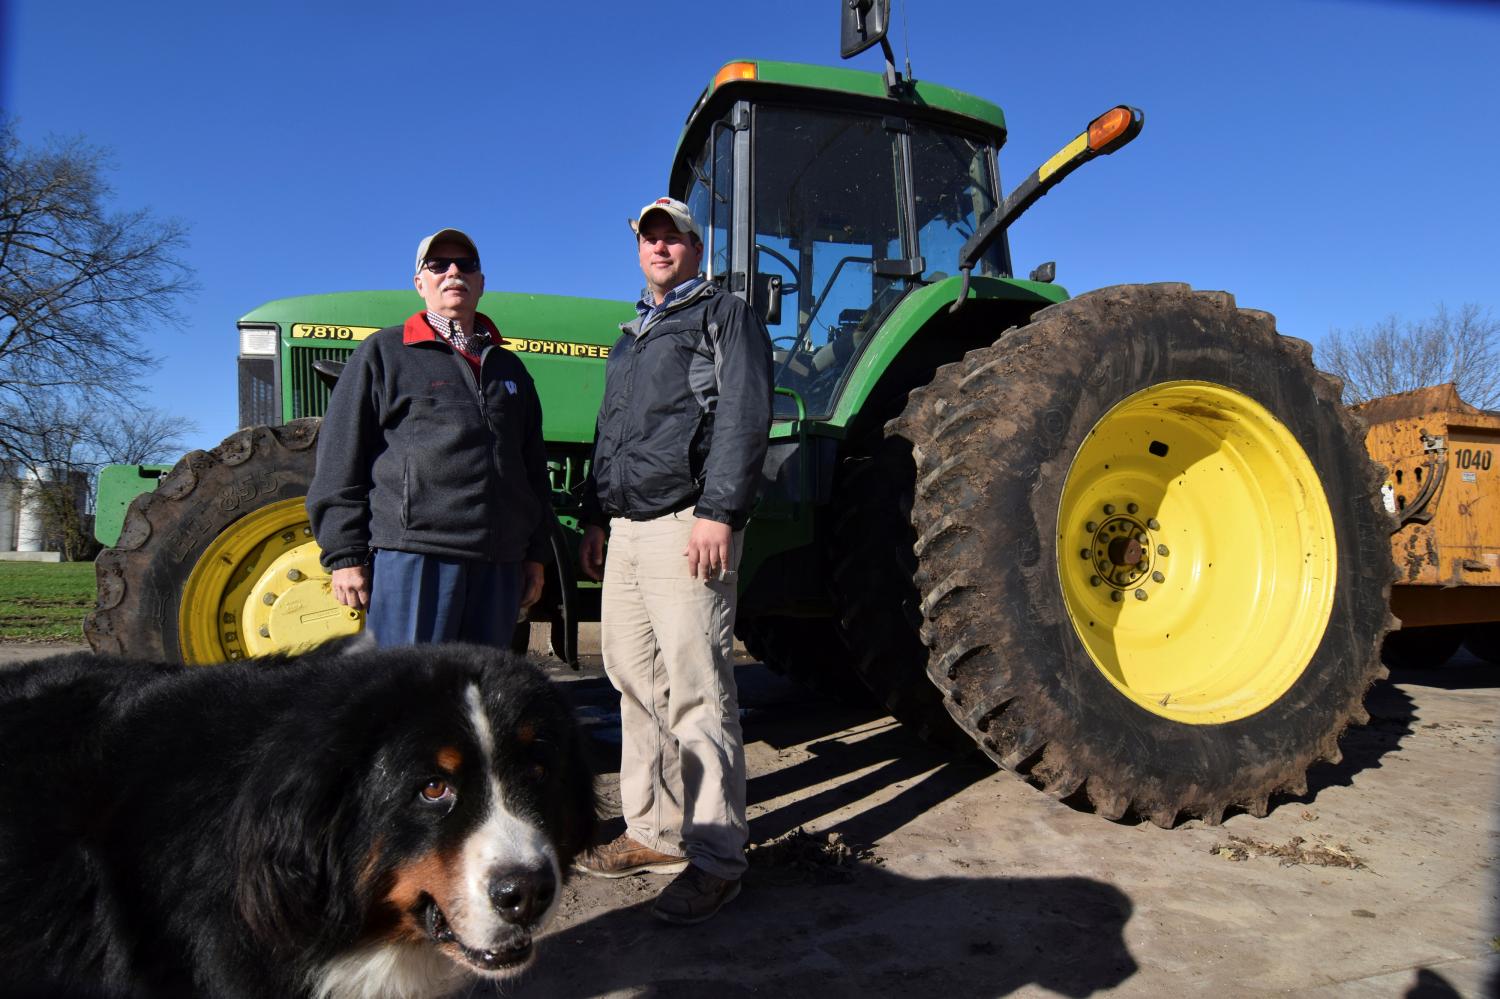 Farmers John Lader (L) and Austin Arndt are pictured on Arndts property just outside Janeseville, Wisconsin, U.S. November 10, 2016. Like many other rural Americans they voted for Donald Trump, in their case because of specific promises the Republican president-elect made to create jobs, cut taxes and repeal Obamacare. Picture taken on November 10, 2016. REUTERS/Nick Carey - RTSXPQ4